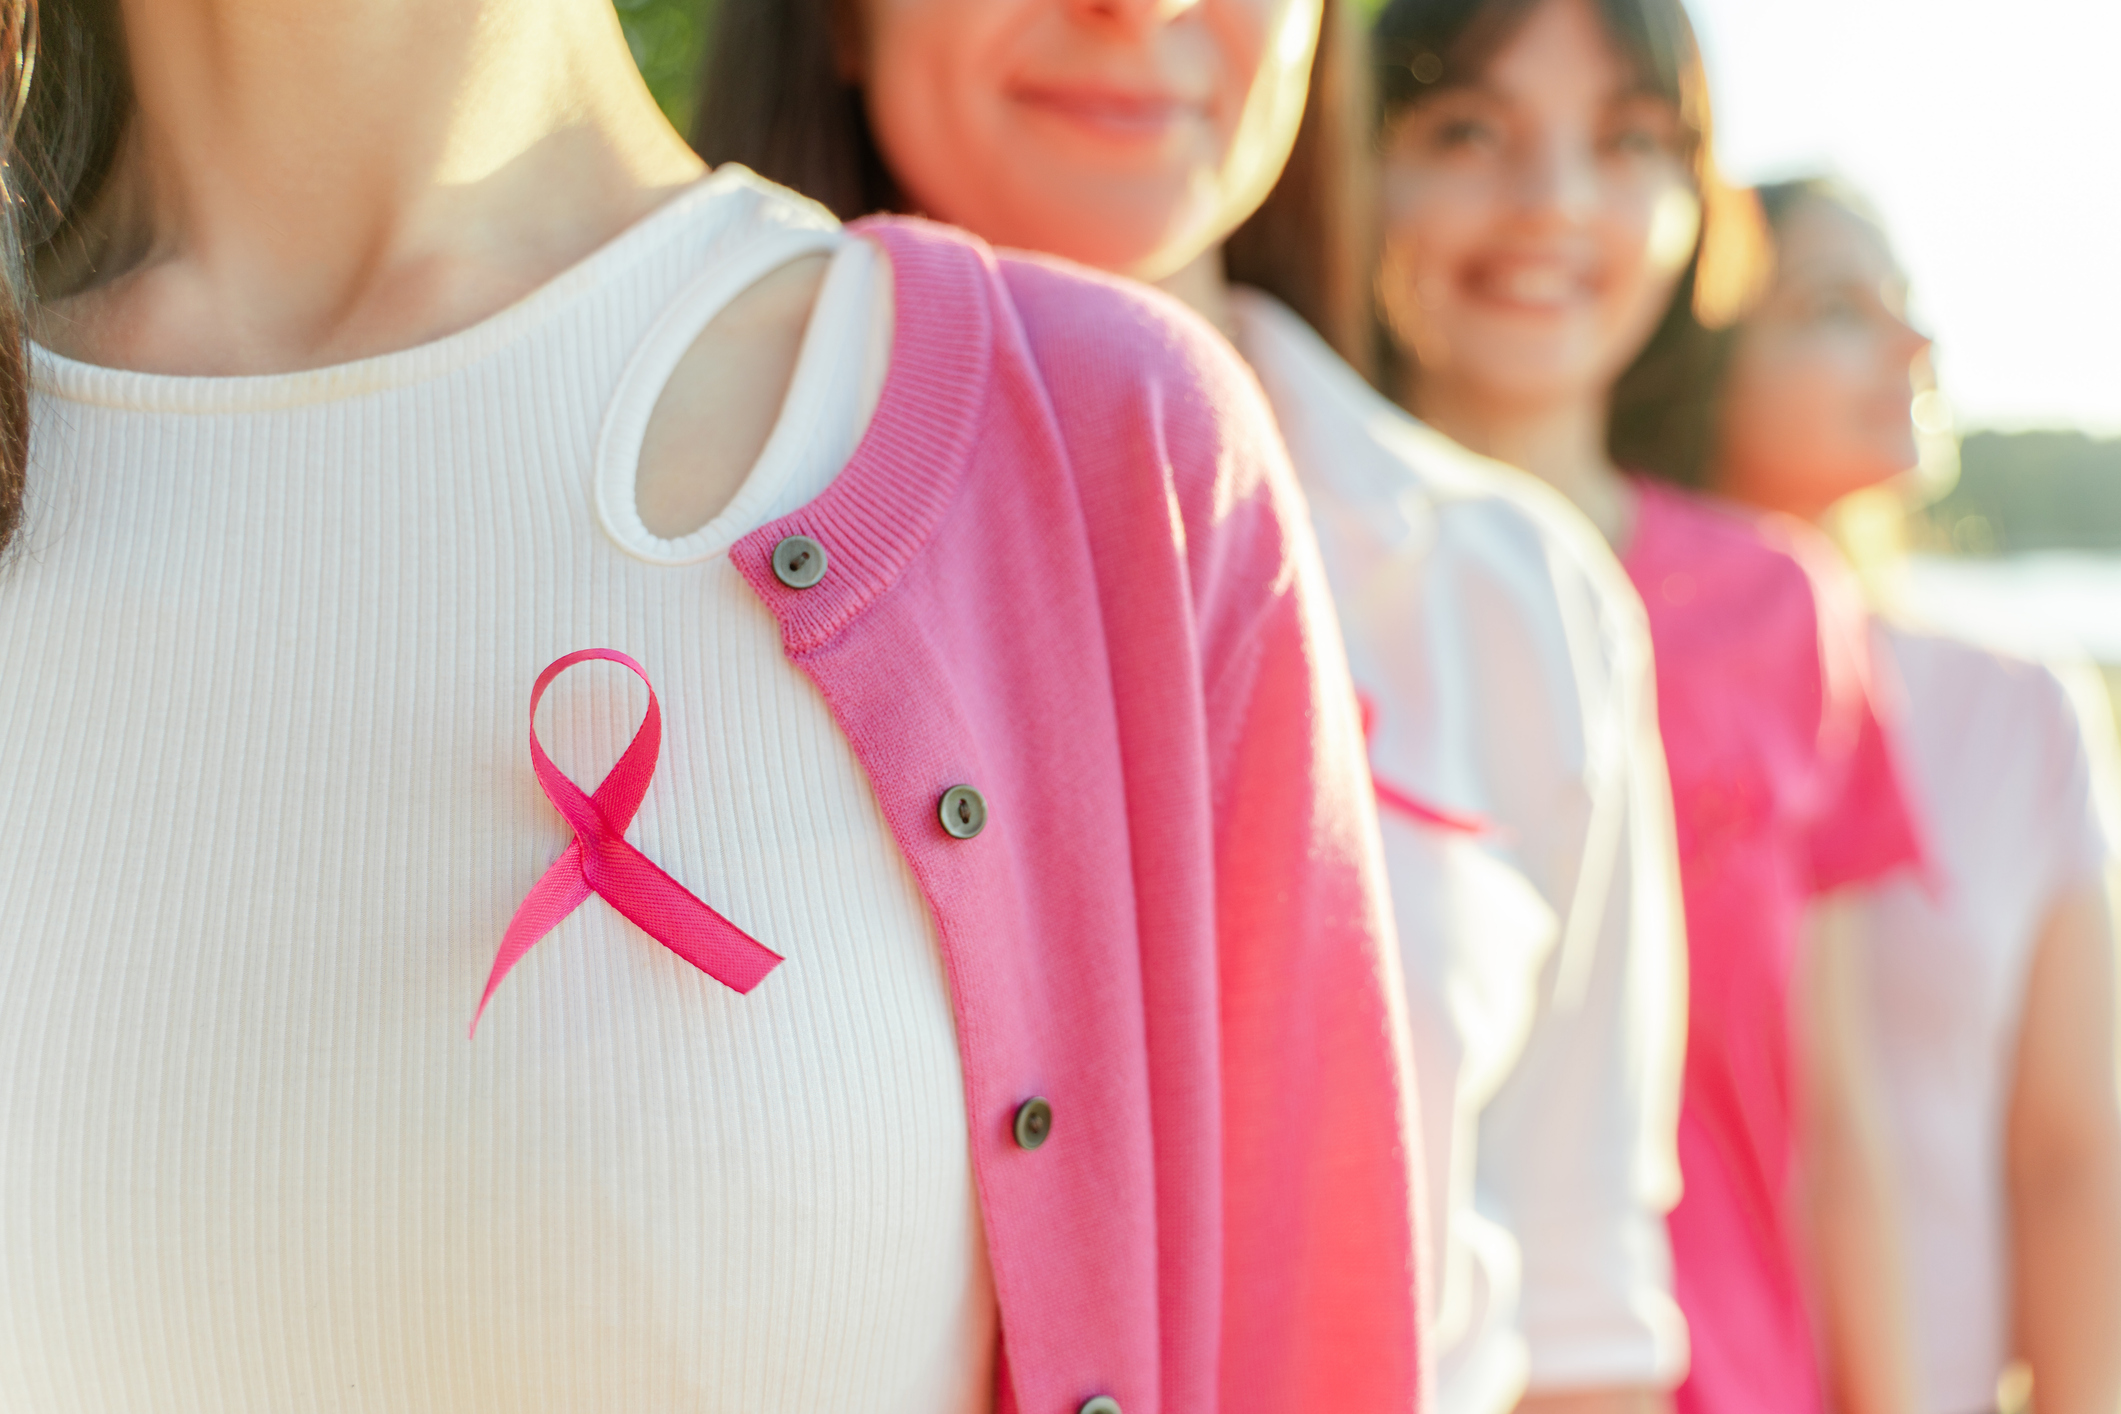 Cropped view of happy smiling women with breast cancer awareness pink ribbon on t-shirts 